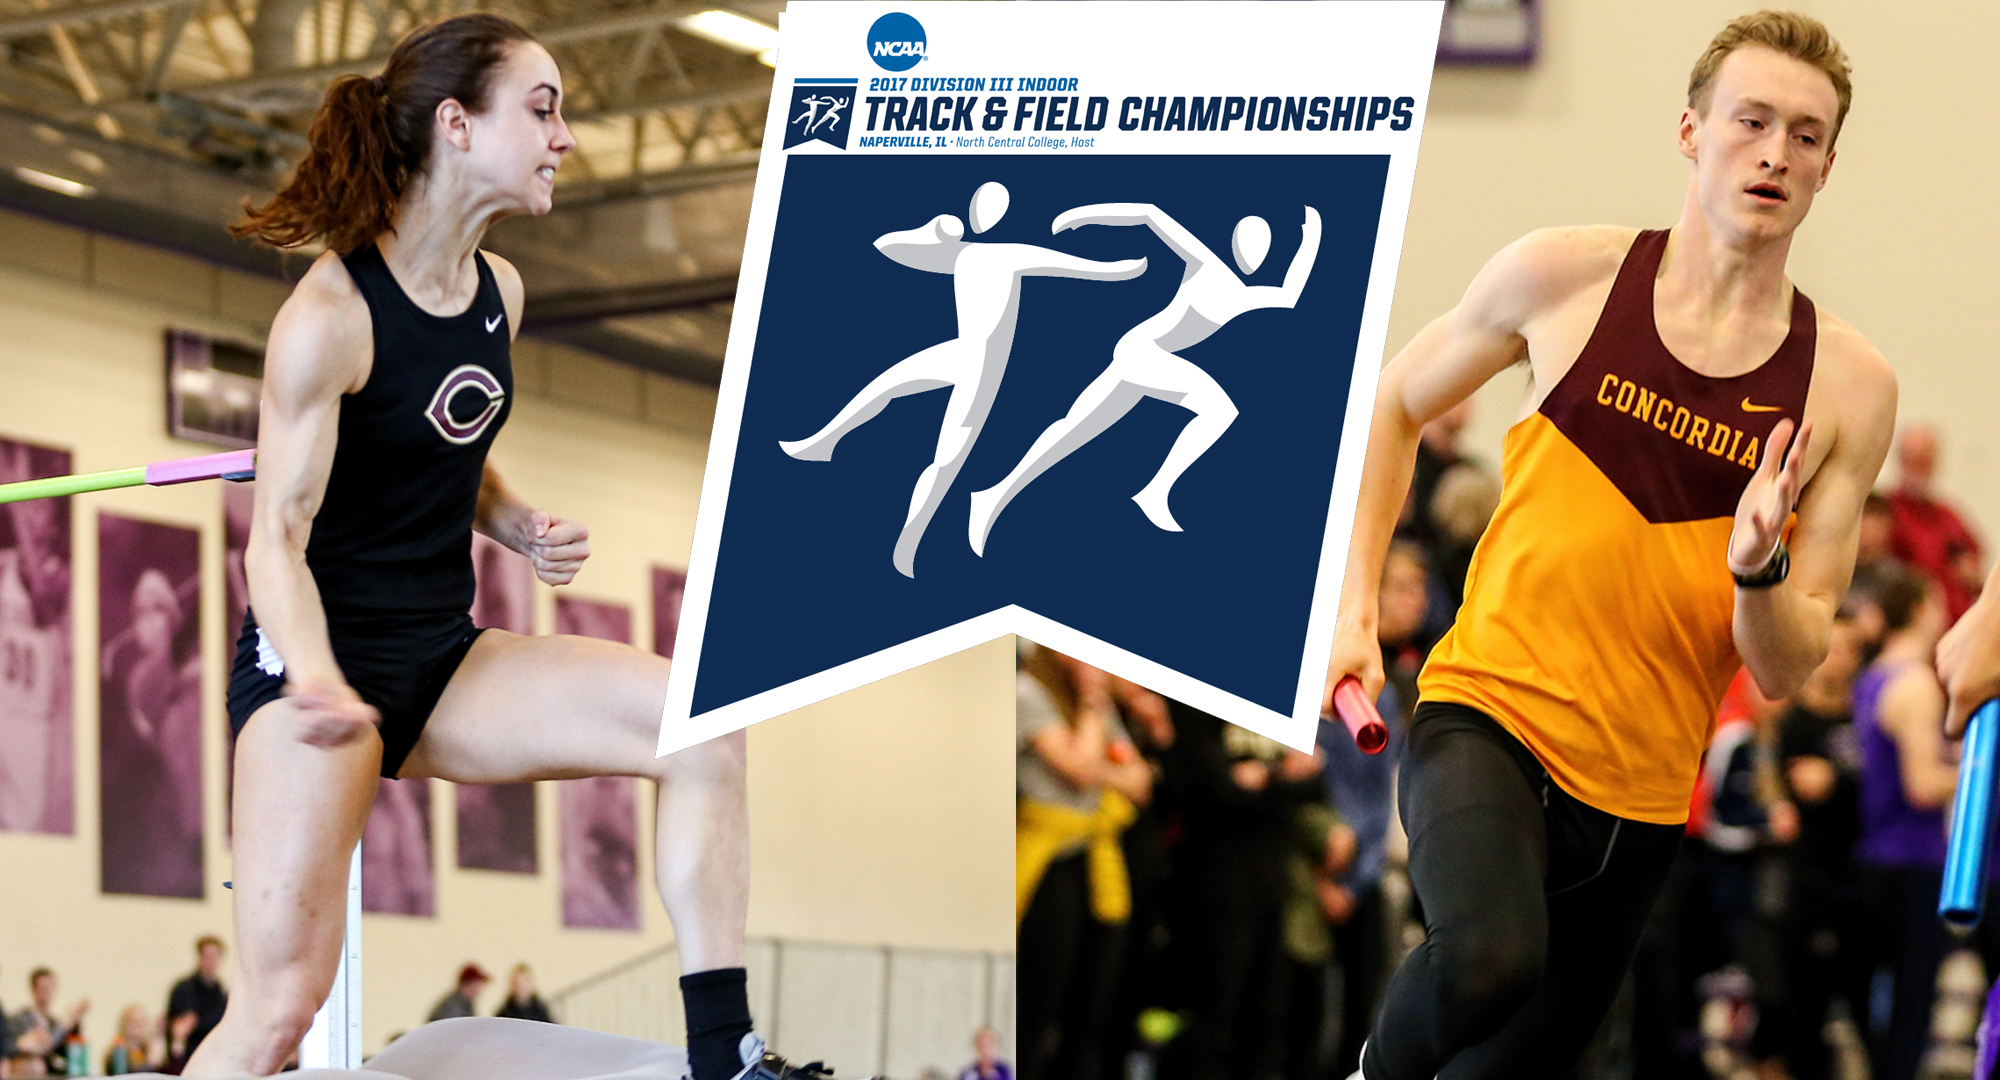 Emma Peterson and Jackson Schepp will both be participating in their very first NCAA National Indoor Meet. (Photos courtesy of Nathan Lodermeier)